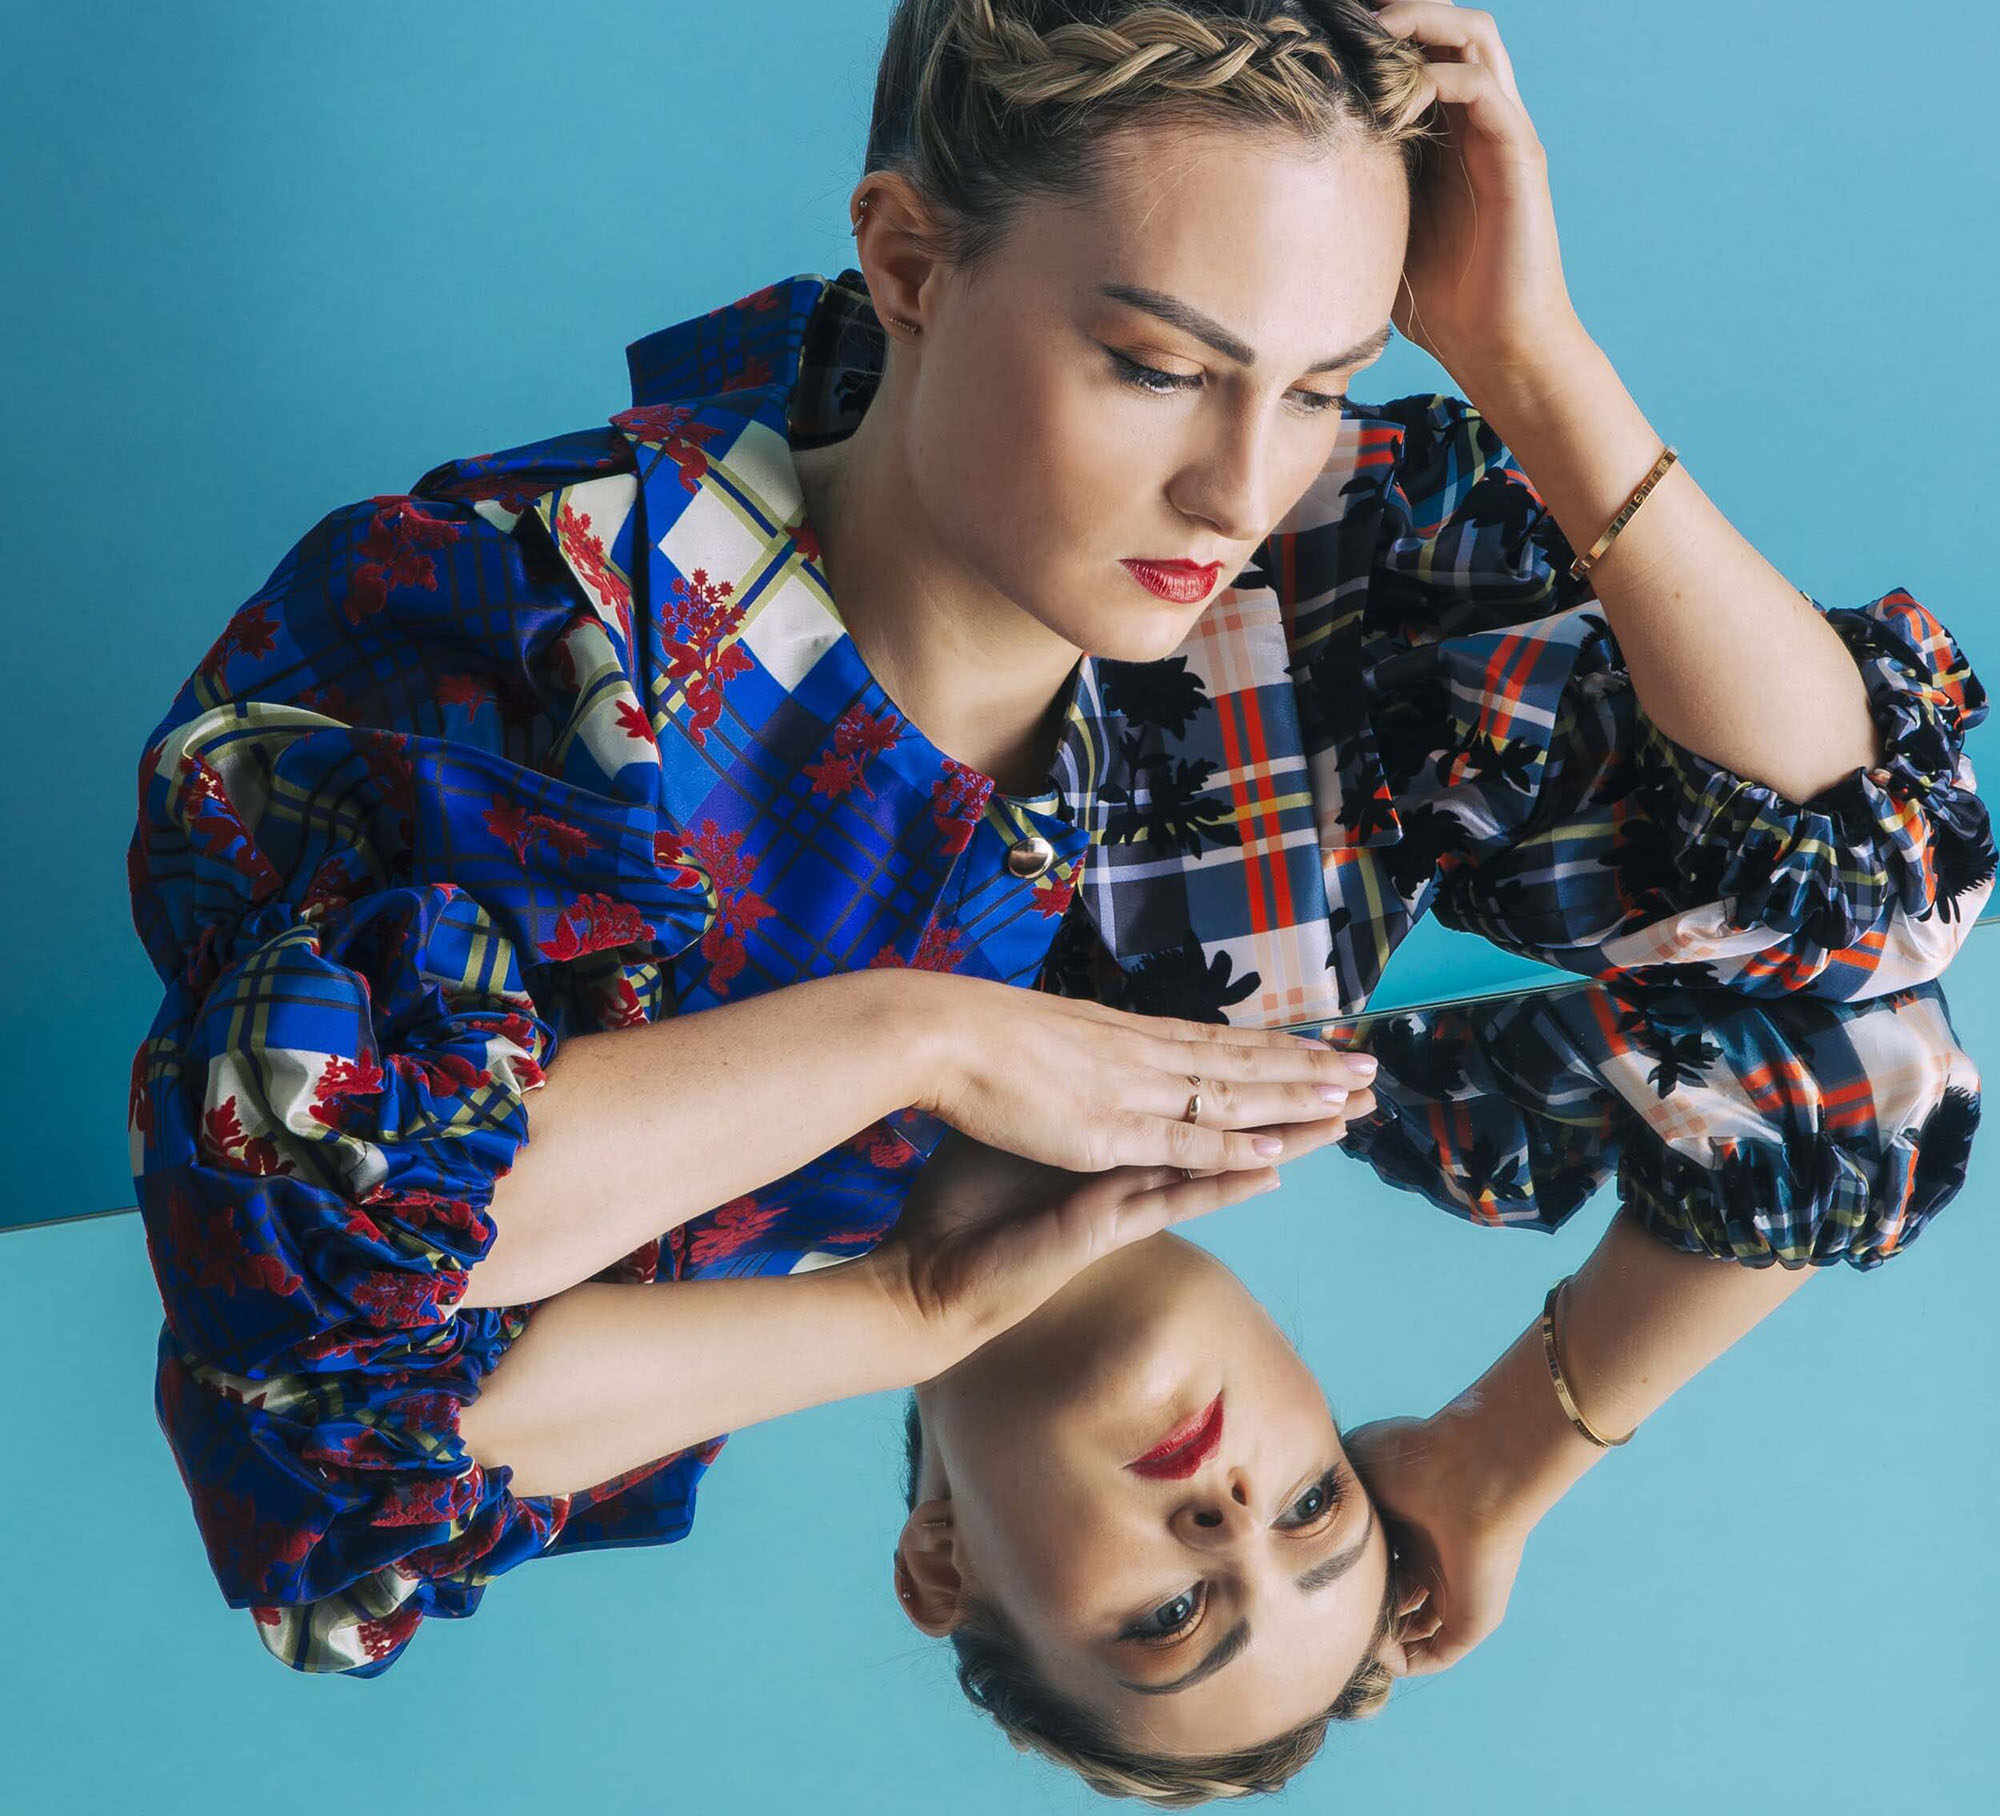 Molly is sitting down at a table with a mirrored surface. You can see her reflection in the mirror. Her hair is in an up-do with braids and a bun. She is wearing a printed multi-colour blouse.